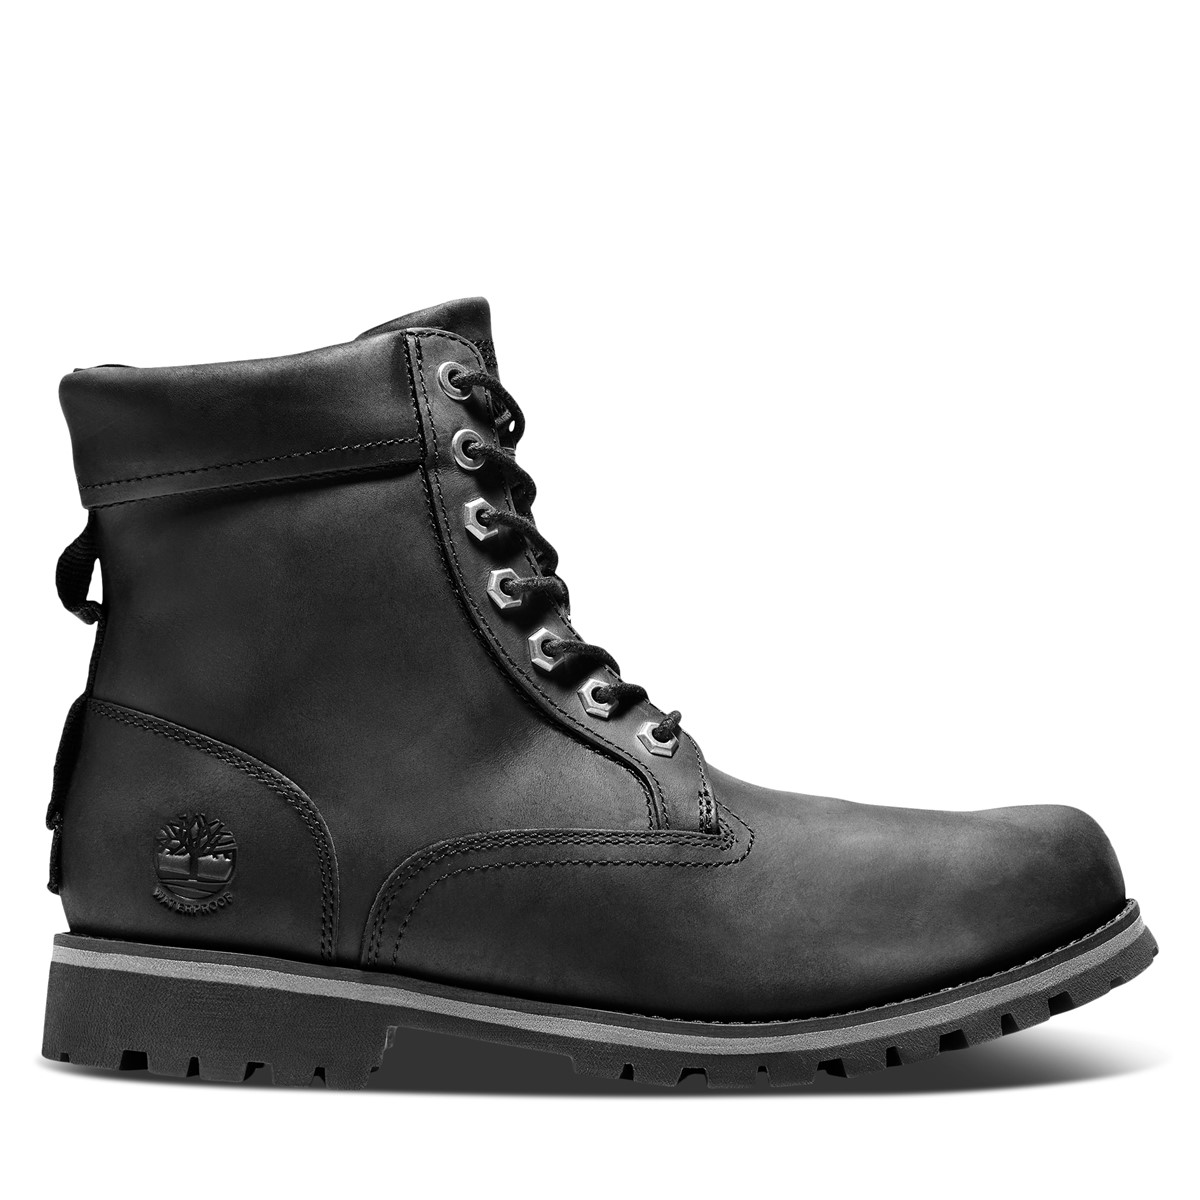 Men's Rugged Waterproof Lace Up Boots in Black